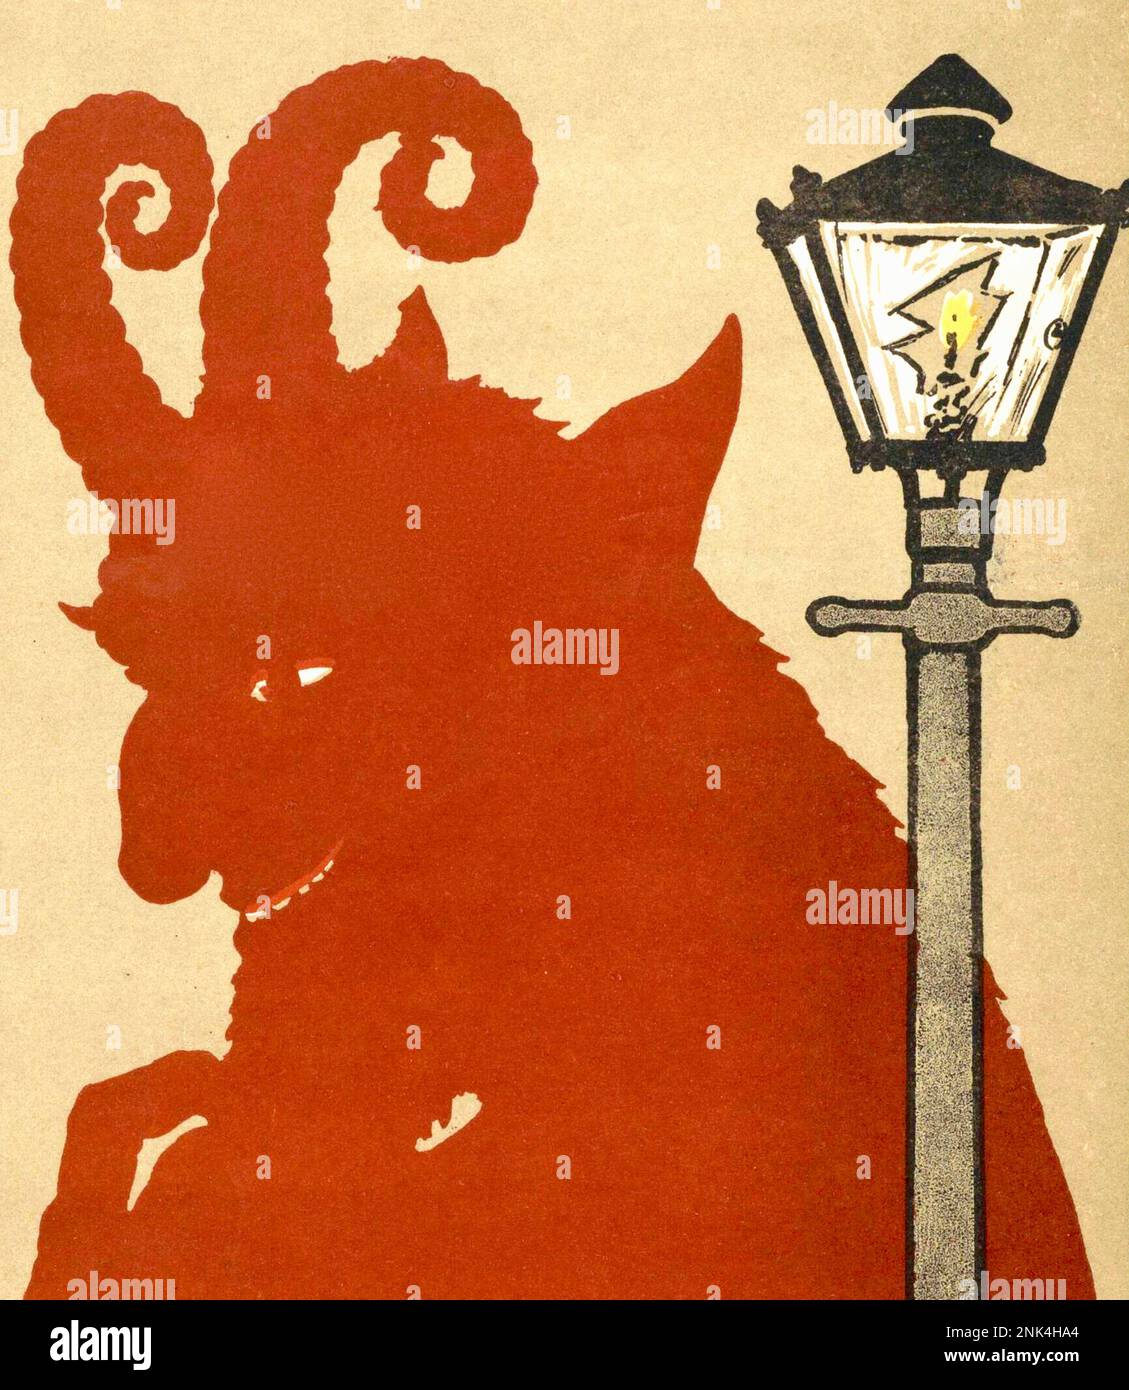 Daan Hoeksema - Shadow and gas lamp art - Poster for children's book Idleness is the devil's ear cushion - between 1894 and 1918 Stock Photo